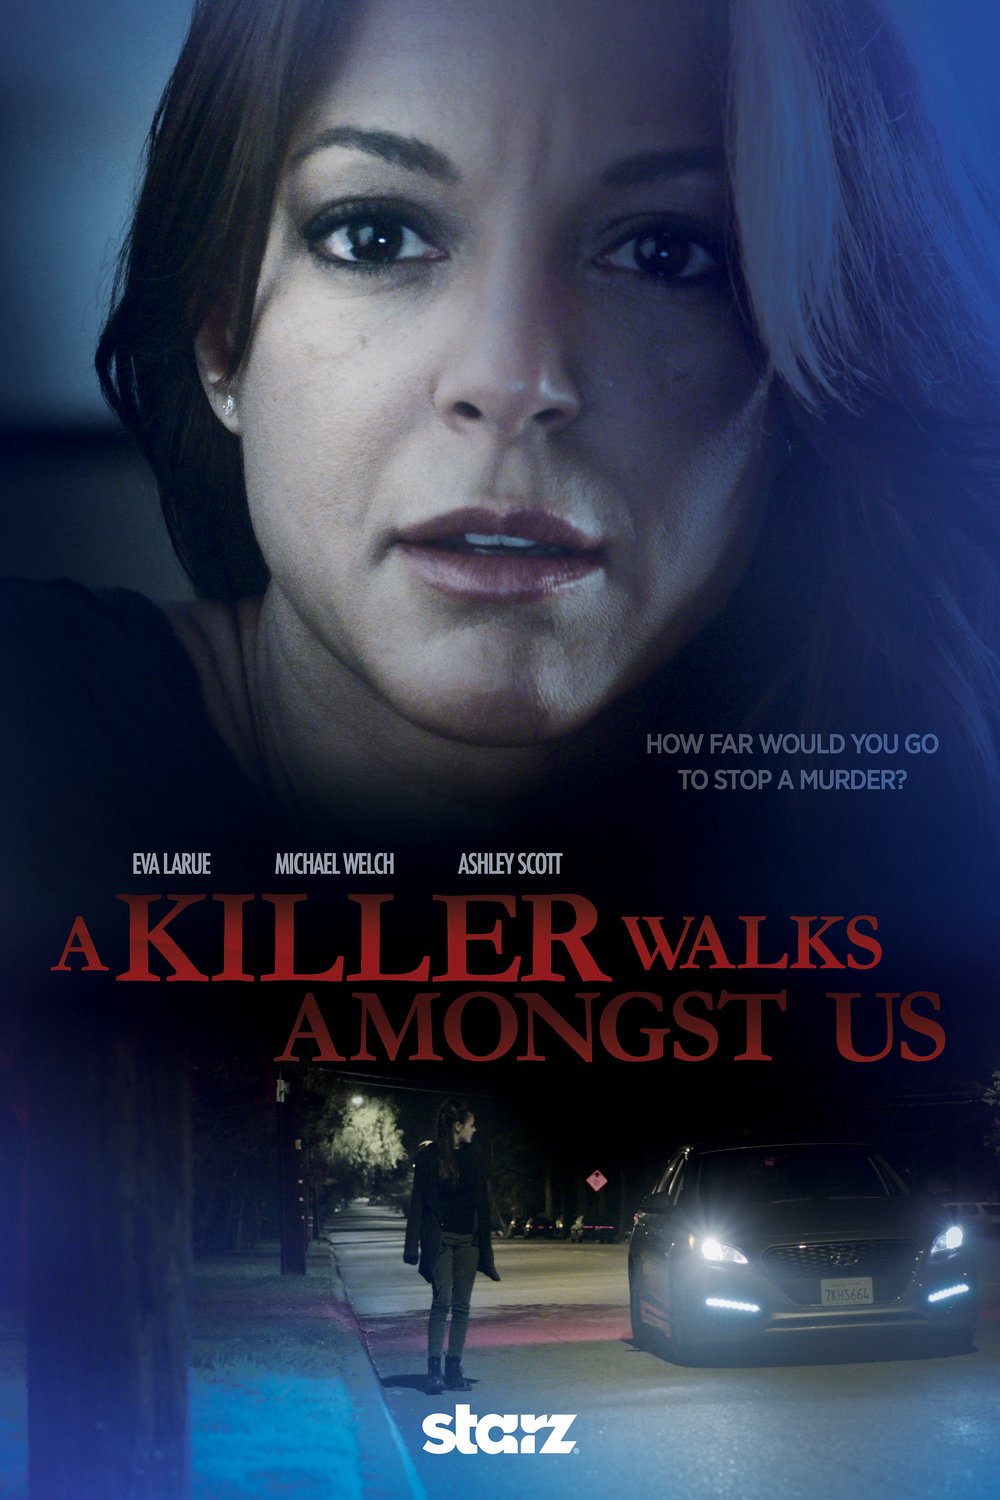 Poster of the movie A Killer Walks Amongst Us